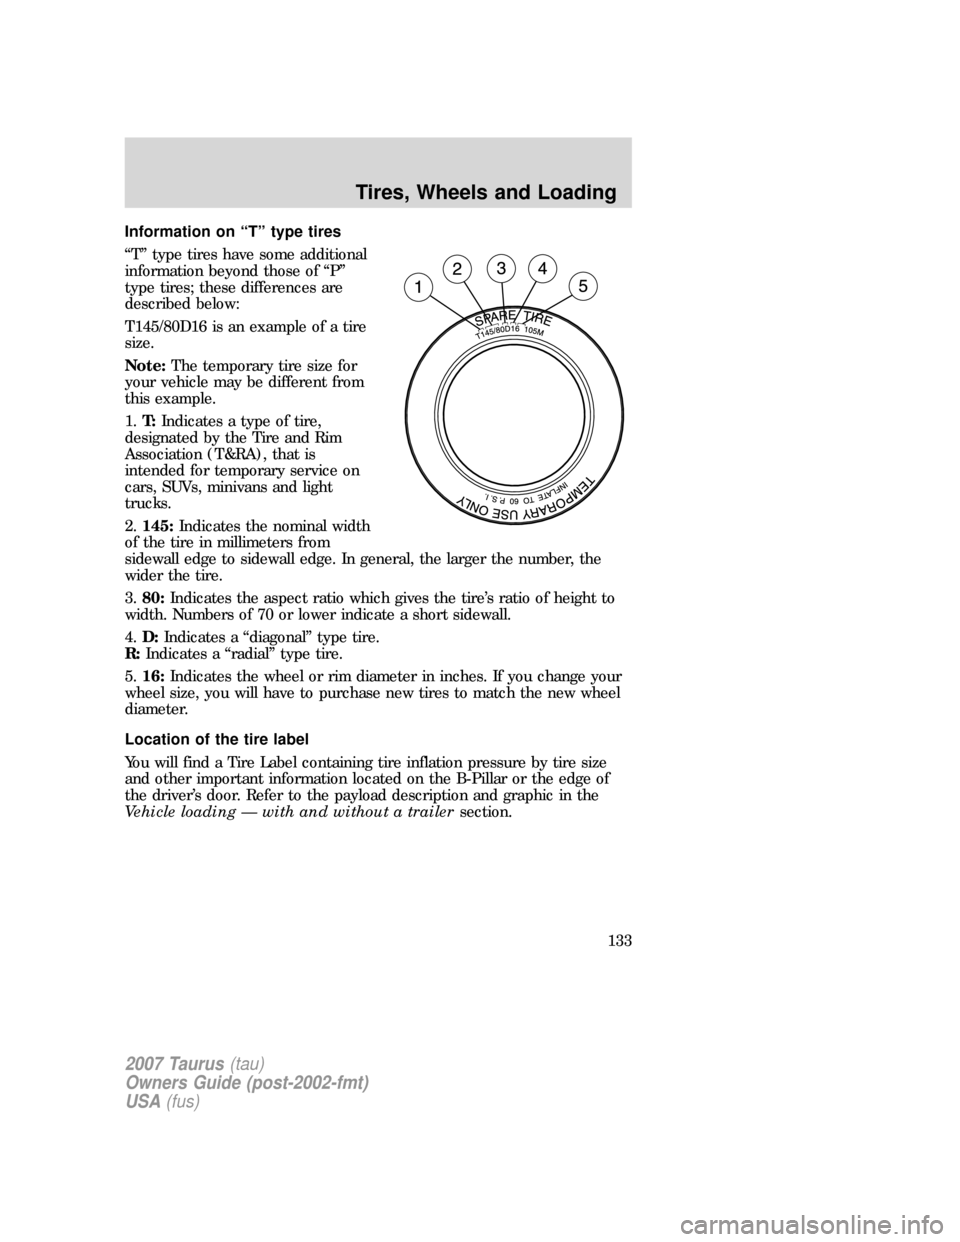 FORD TAURUS 2007 4.G Owners Manual Information on “T” type tires
“T” type tires have some additional
information beyond those of “P”
type tires; these differences are
described below:
T145/80D16 is an example of a tire
size